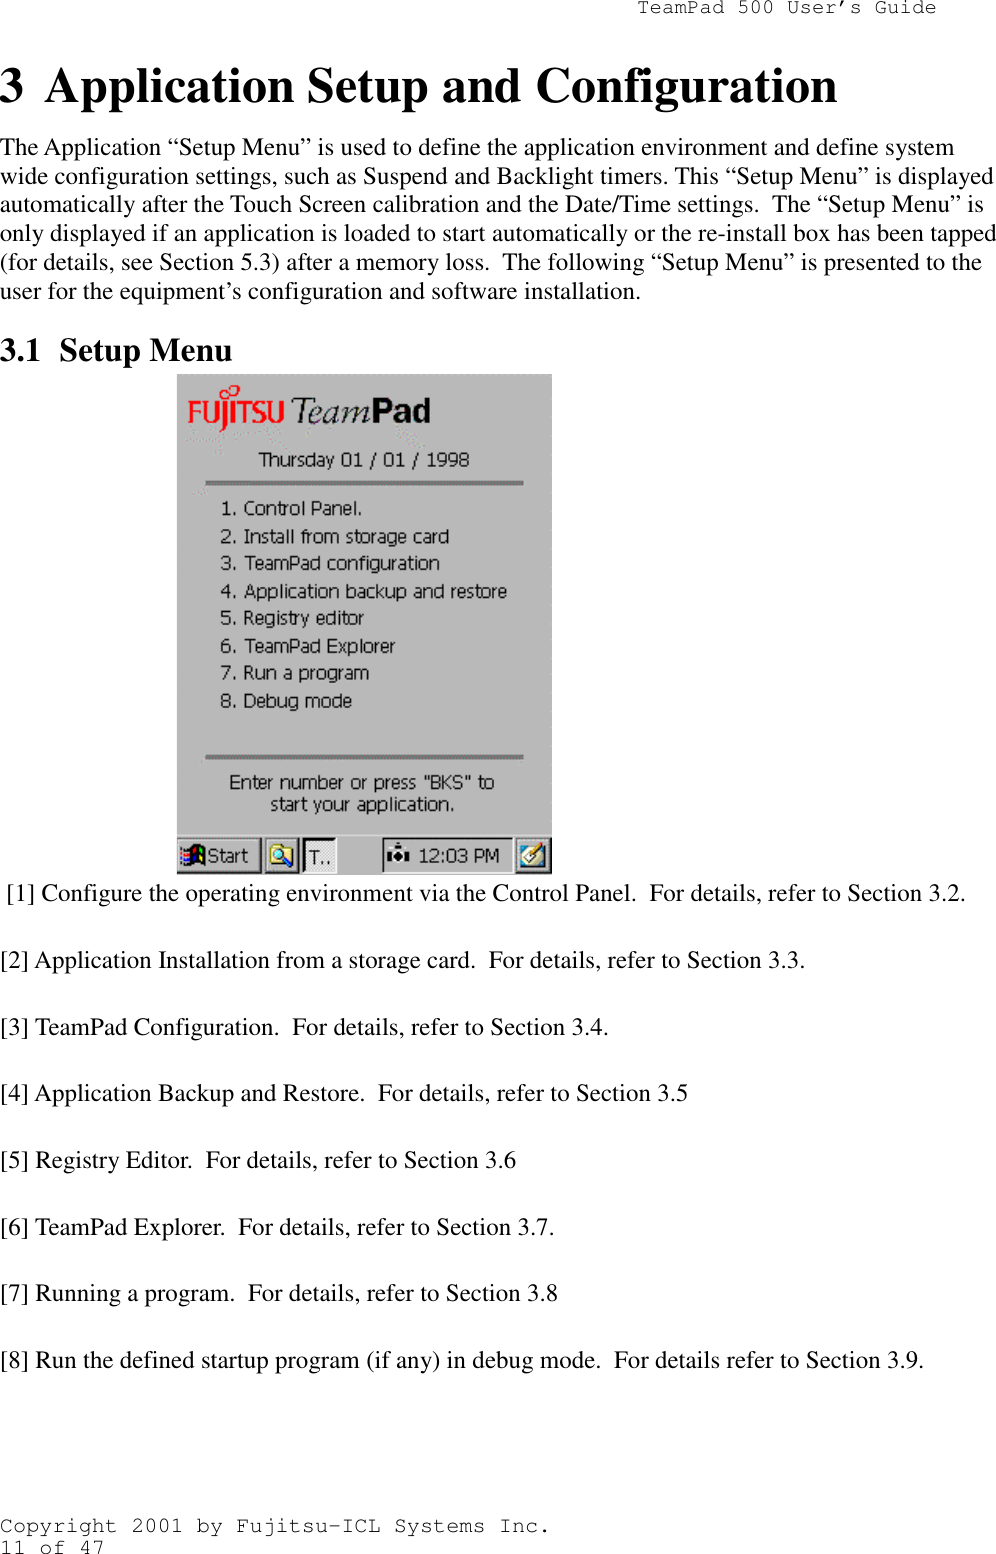                TeamPad 500 User’s GuideCopyright 2001 by Fujitsu-ICL Systems Inc.11 of 47The Application “Setup Menu” is used to define the application environment and define systemwide configuration settings, such as Suspend and Backlight timers. This “Setup Menu” is displayedautomatically after the Touch Screen calibration and the Date/Time settings.  The “Setup Menu” isonly displayed if an application is loaded to start automatically or the re-install box has been tapped(for details, see Section 5.3) after a memory loss.  The following “Setup Menu” is presented to theuser for the equipment’s configuration and software installation.3.1 Setup Menu [1] Configure the operating environment via the Control Panel.  For details, refer to Section 3.2.[2] Application Installation from a storage card.  For details, refer to Section 3.3.[3] TeamPad Configuration.  For details, refer to Section 3.4.[4] Application Backup and Restore.  For details, refer to Section 3.5[5] Registry Editor.  For details, refer to Section 3.6[6] TeamPad Explorer.  For details, refer to Section 3.7.[7] Running a program.  For details, refer to Section 3.8[8] Run the defined startup program (if any) in debug mode.  For details refer to Section 3.9.3 Application Setup and Configuration